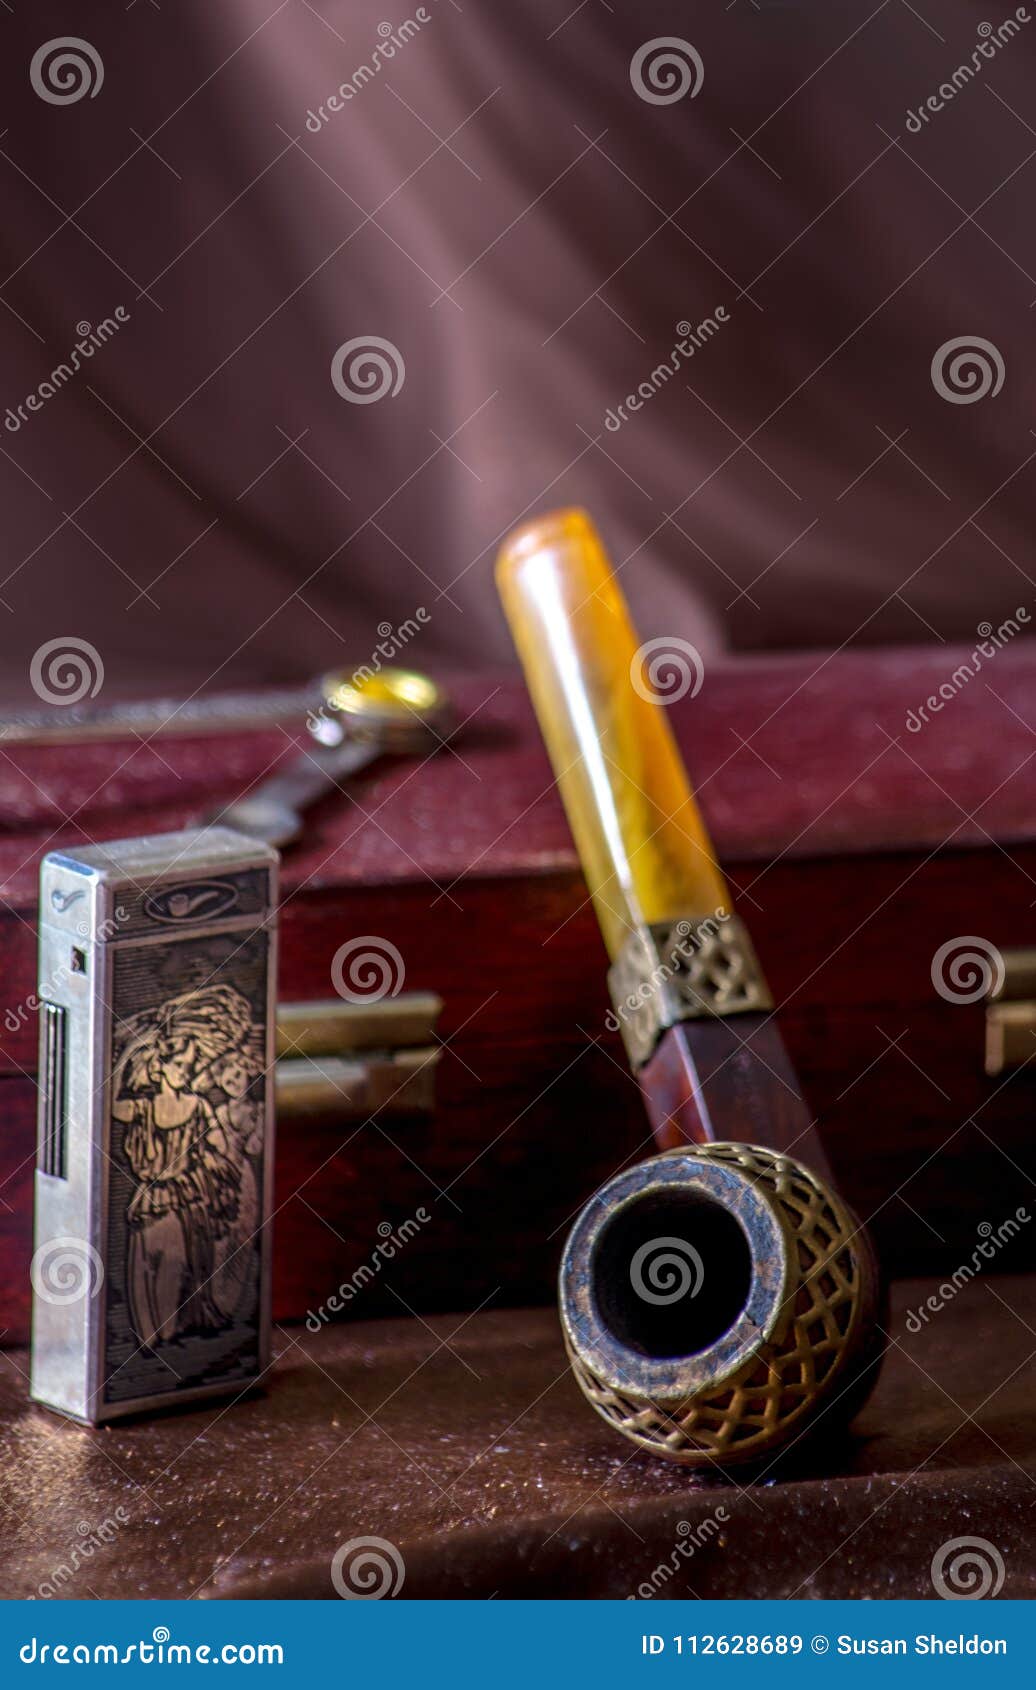 Antique Smoking Pipe And Old Decorative Lighter Stock Image ...